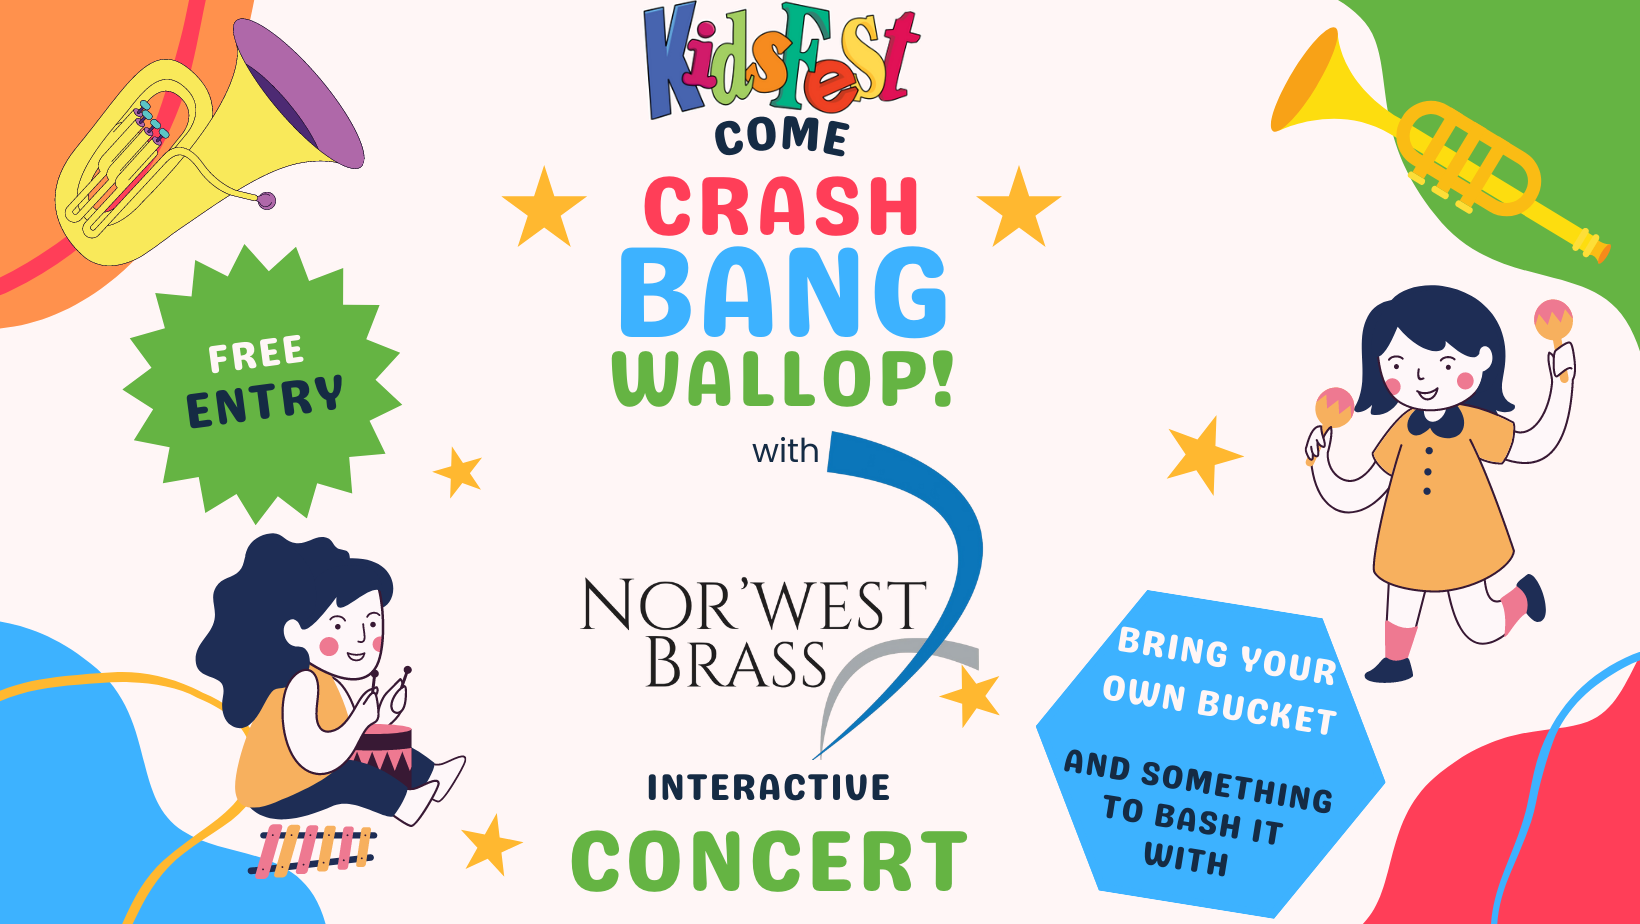 Image of Nor’west Brass Crash, Bang Wallop Interactive Concert event